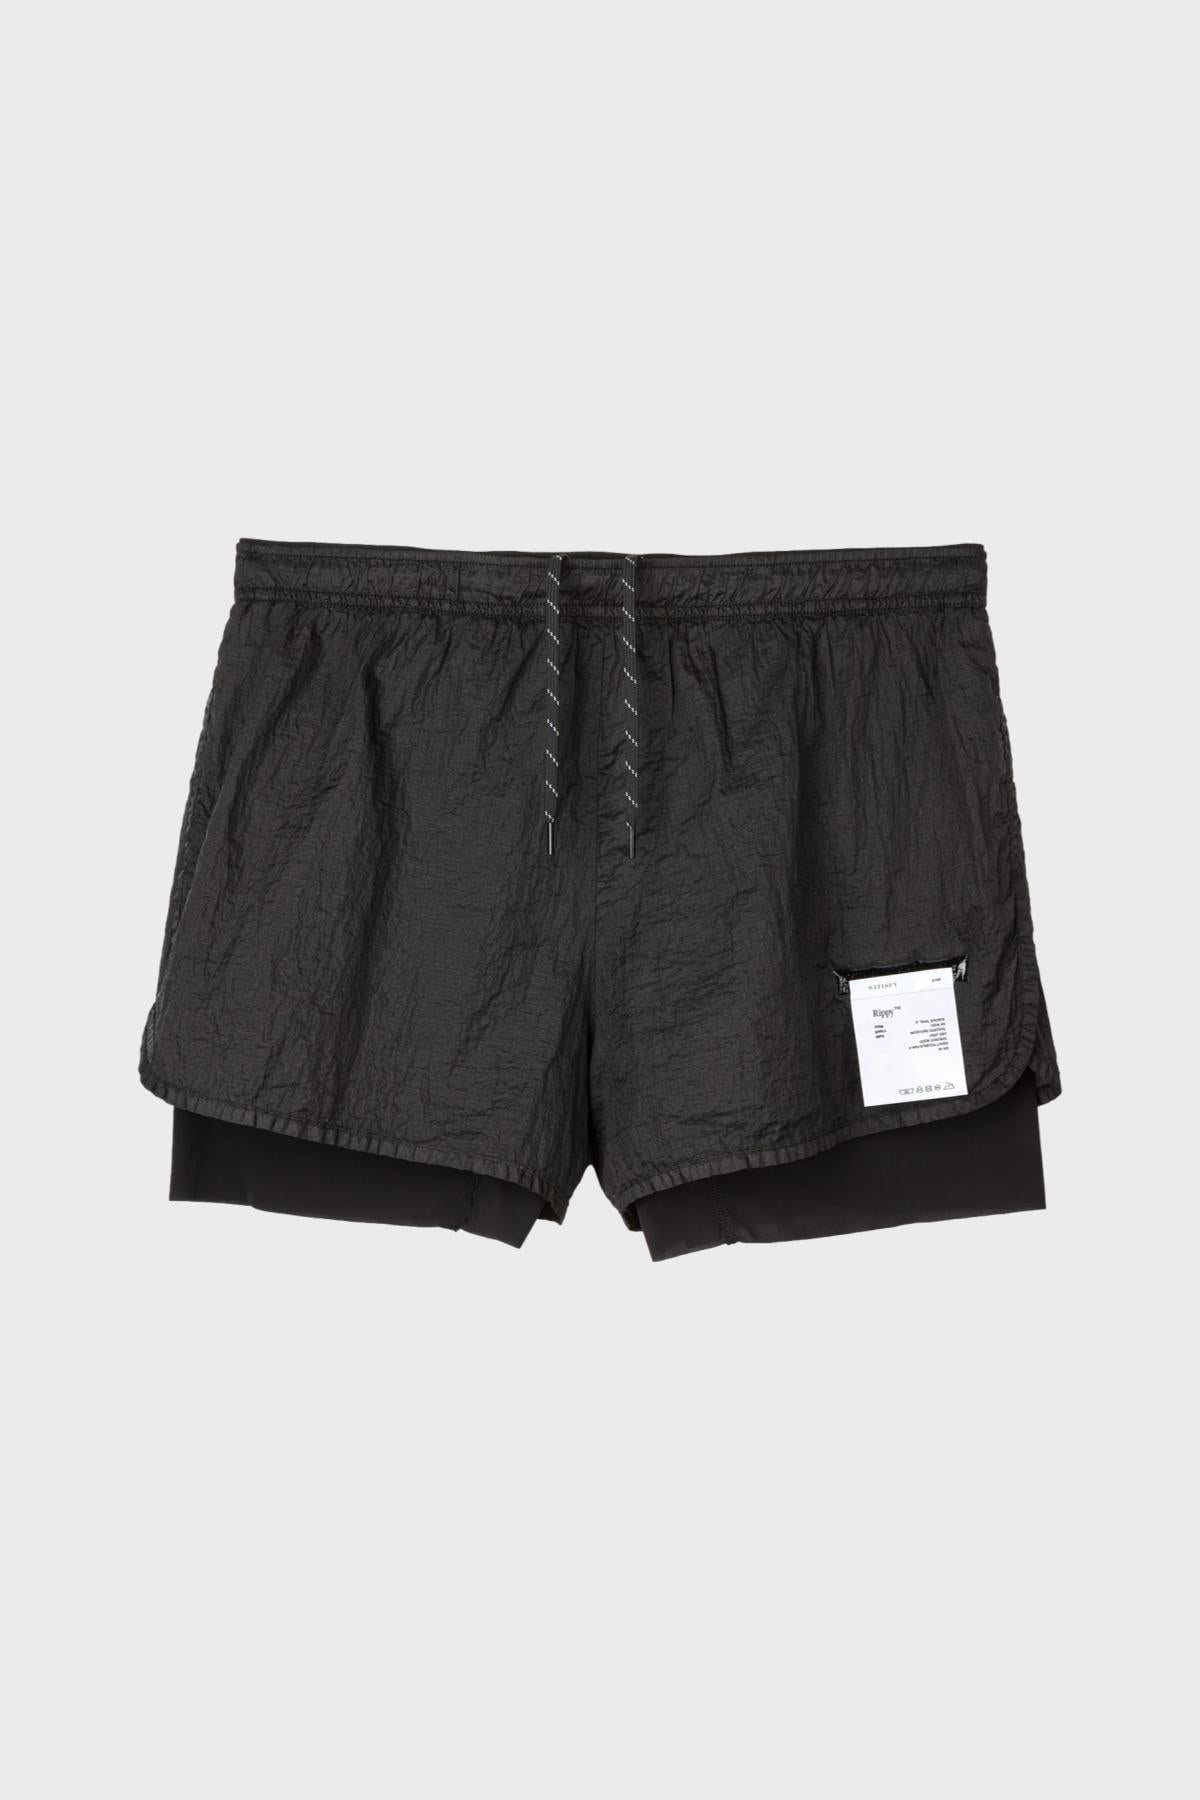 Satisfy - Rippy 3&quot; Trail Shorts